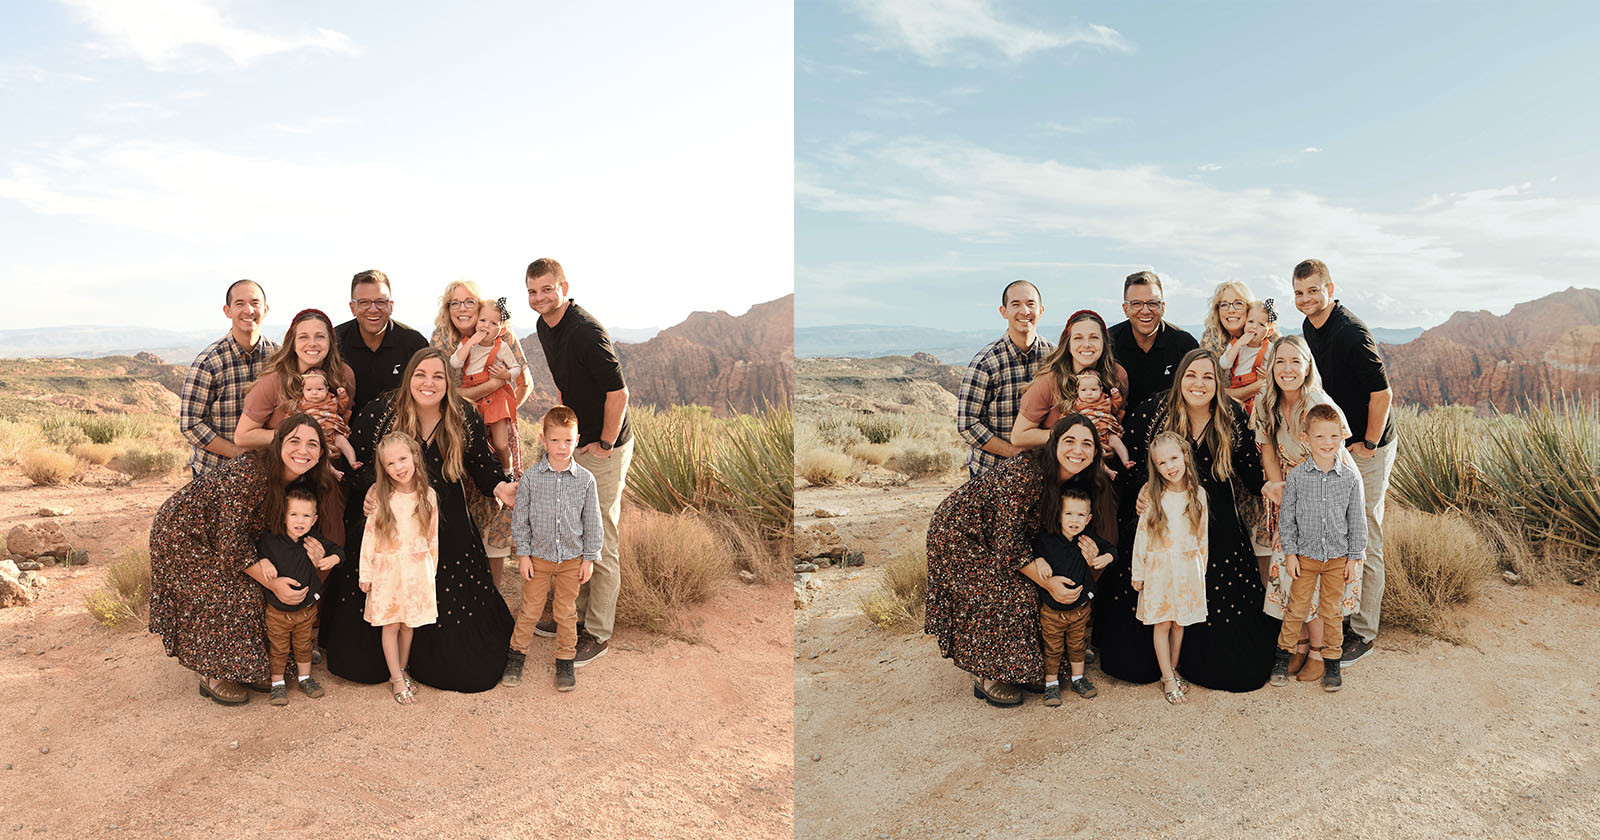 How a Photographer Photoshopped Herself Into Her Family Portrait